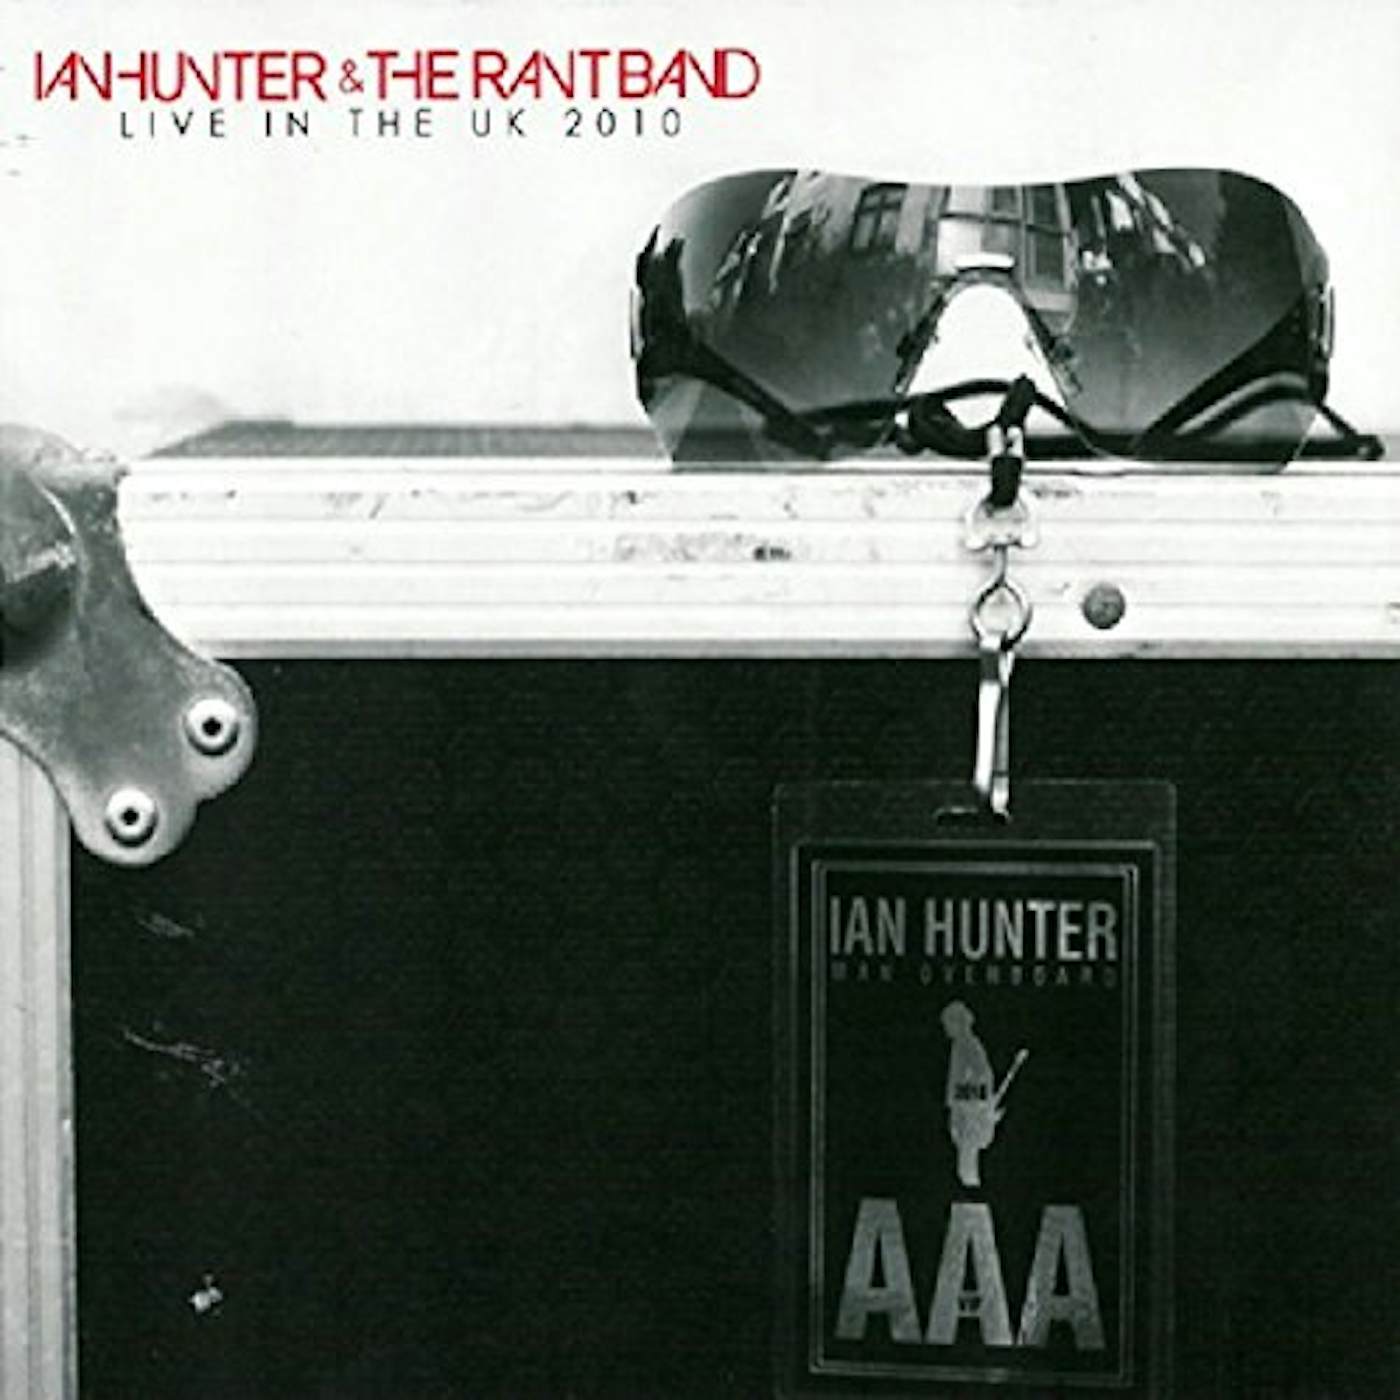 Ian Hunter And The Rant Band LIVE IN THE UK 2010 CD